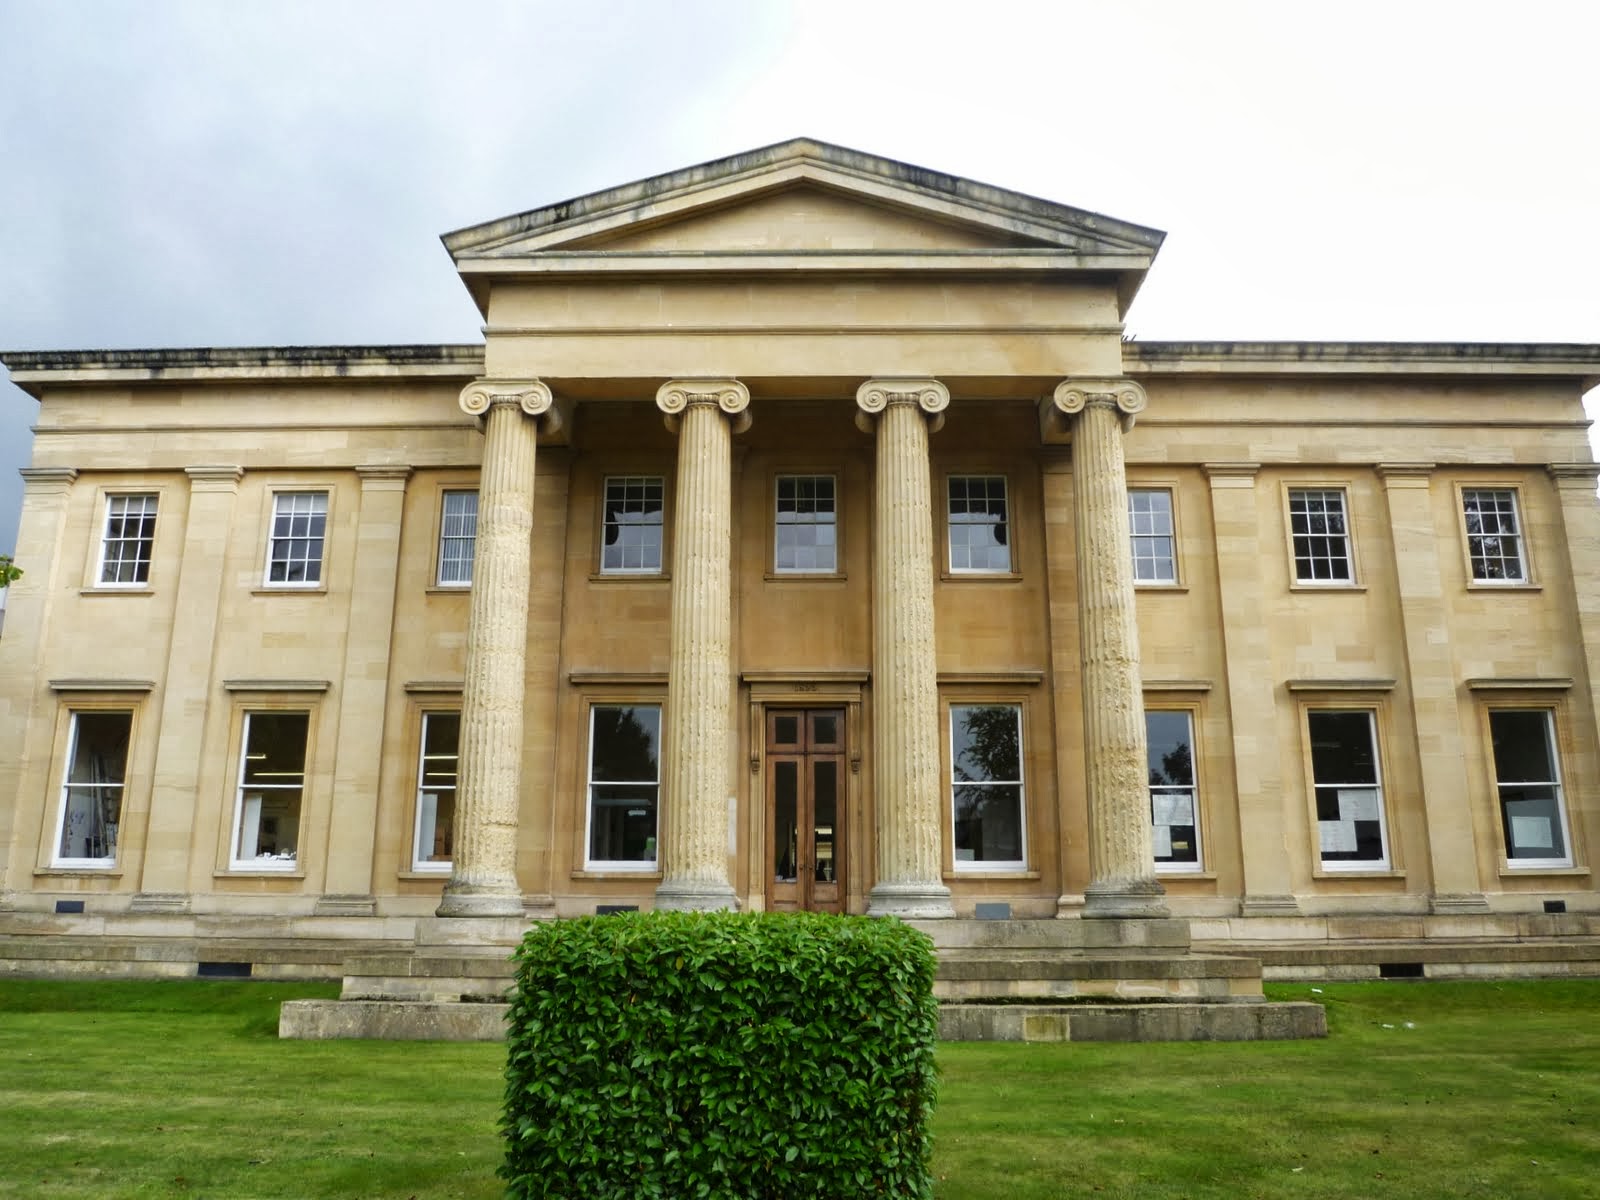 View of Thirlestaine House, Cheltenham, Home of Sir Thomas Phillipps. View from Bath Road. Photograph by Philip Ratzer on 2 October 2013. Image via Creative Commons.